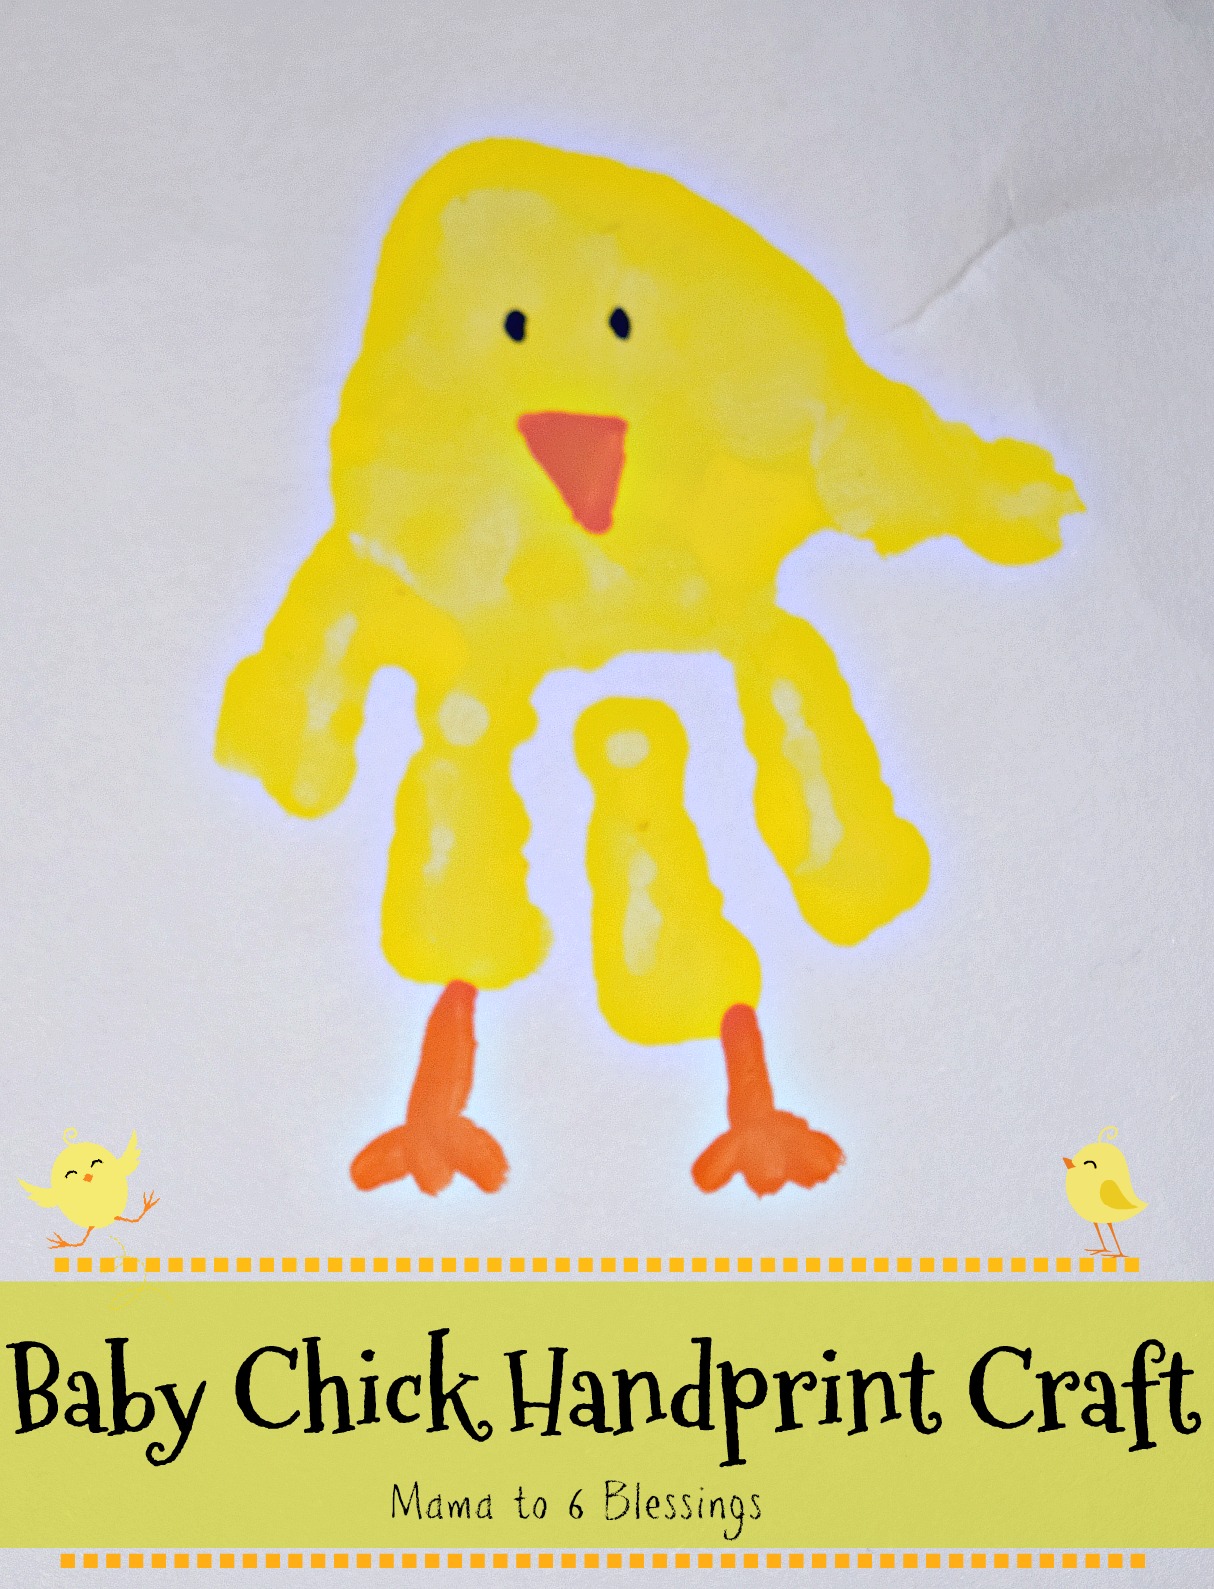 30 Best Farm Animals Preschool Activities and Crafts for Kids - Teaching  Expertise